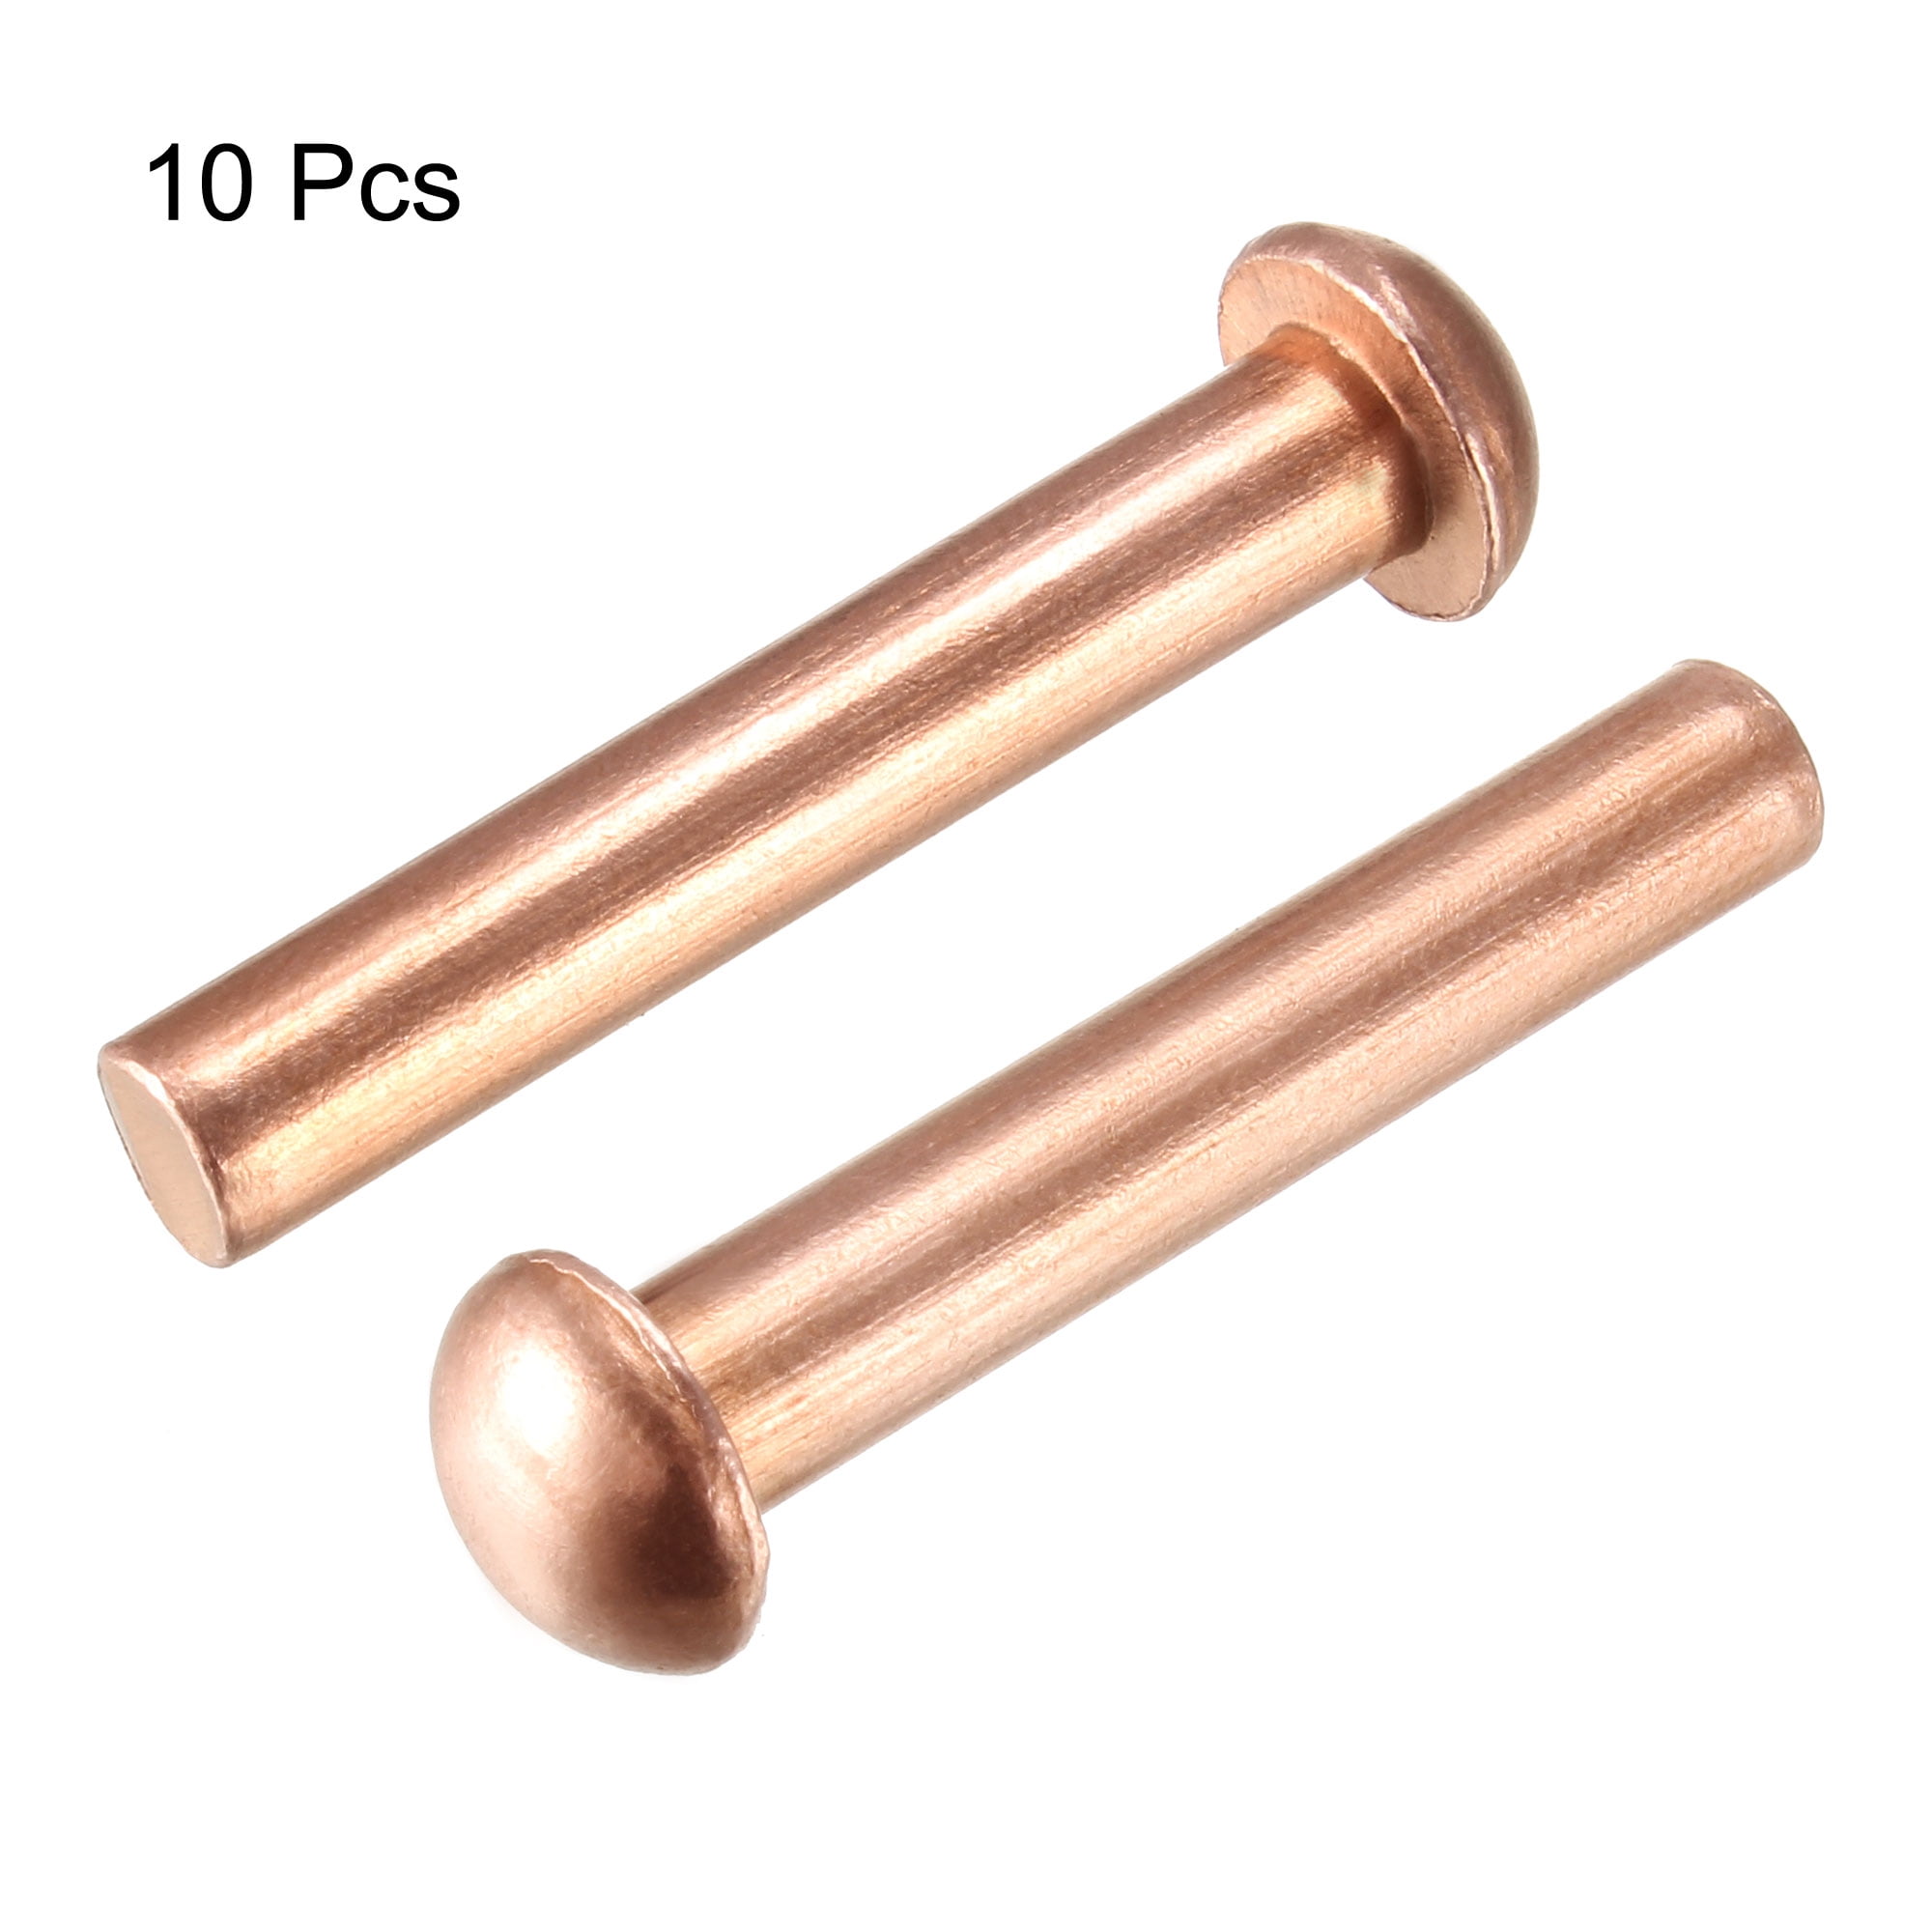 15/64 Inch x 1 3/8 Inch Flat Head Copper Solid Rivets Fasteners Pack of 10